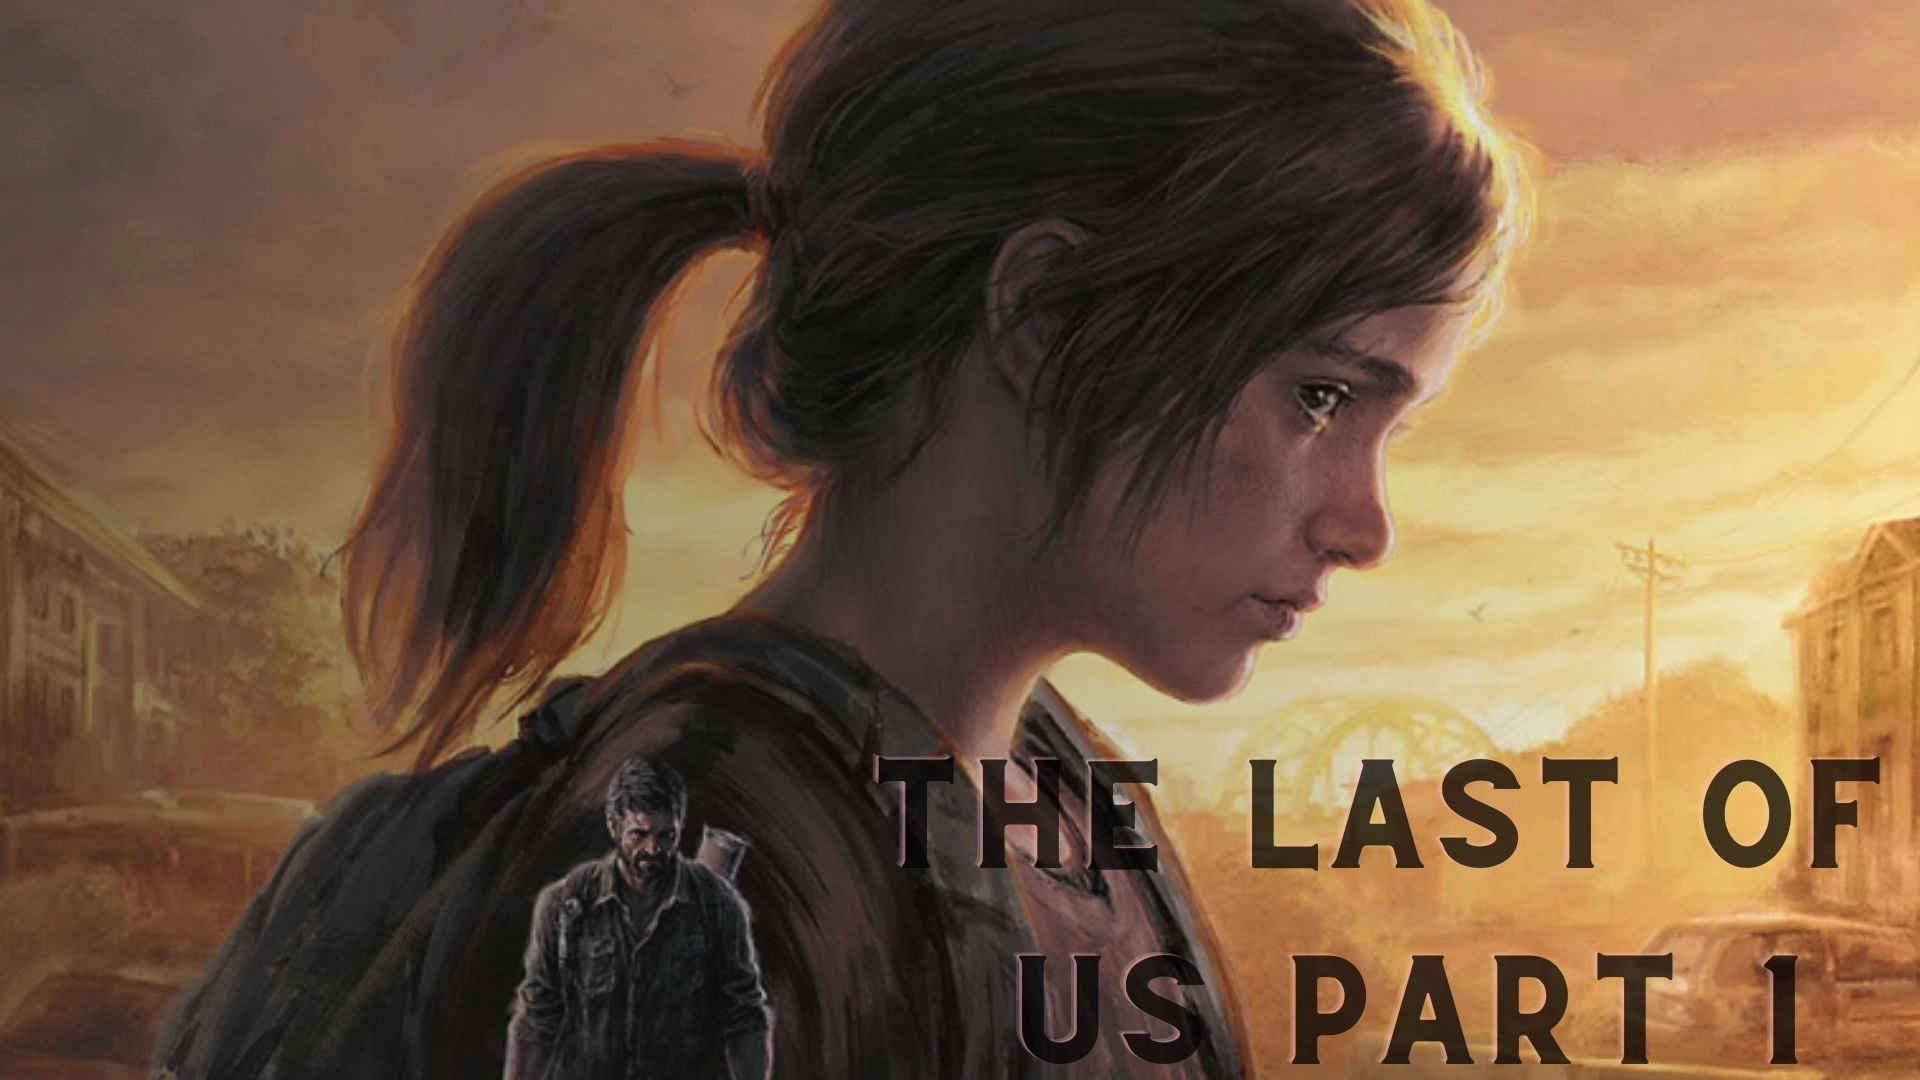 The Last Of Us Part 1 Parents Guide and Age Rating (2022)